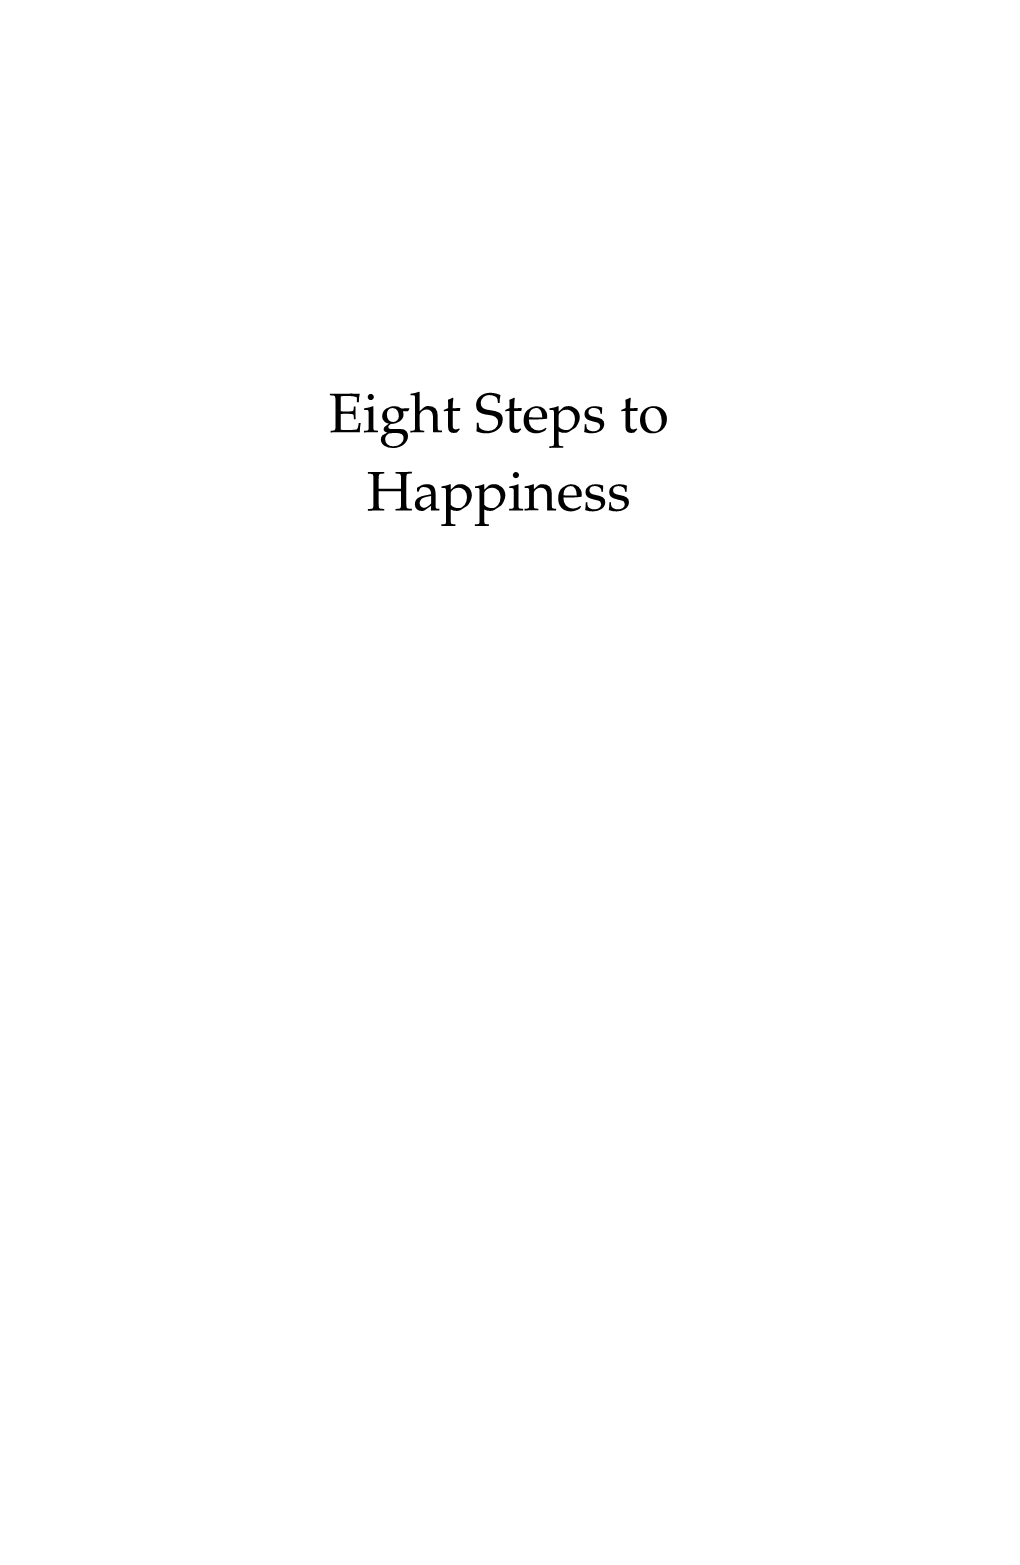 Eight Steps to Happiness Also by Geshe Kelsang Gyatso